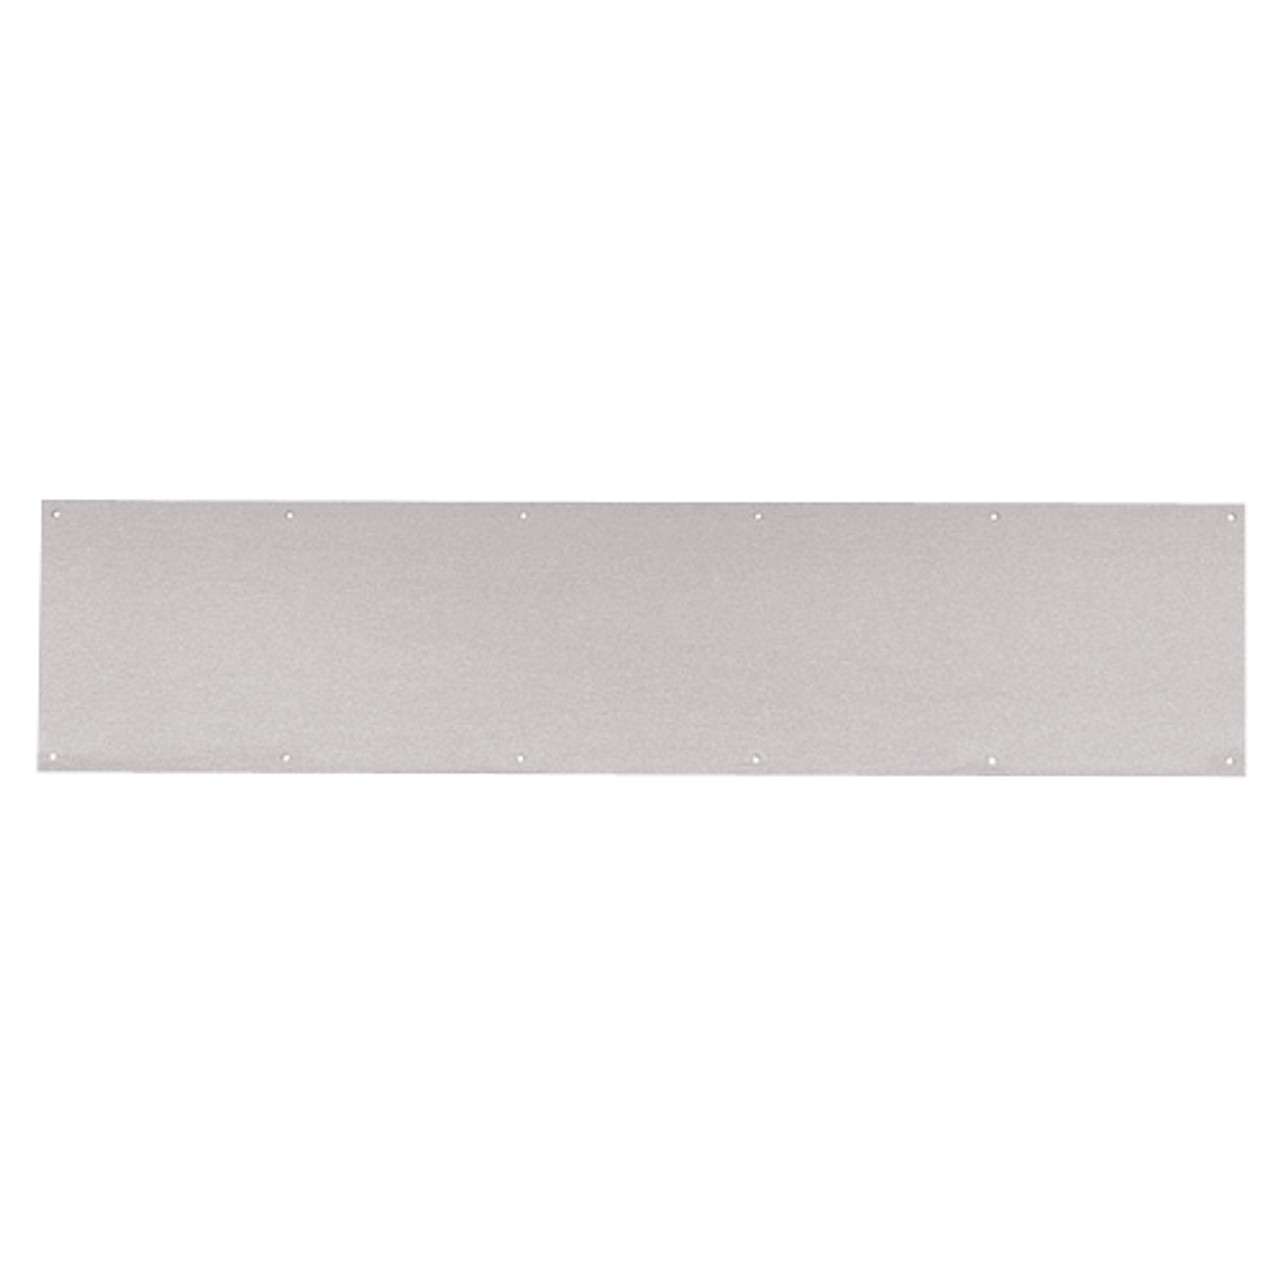 8400-US32D-34x42-B-CS Ives 8400 Series Protection Plate in Satin Stainless Steel